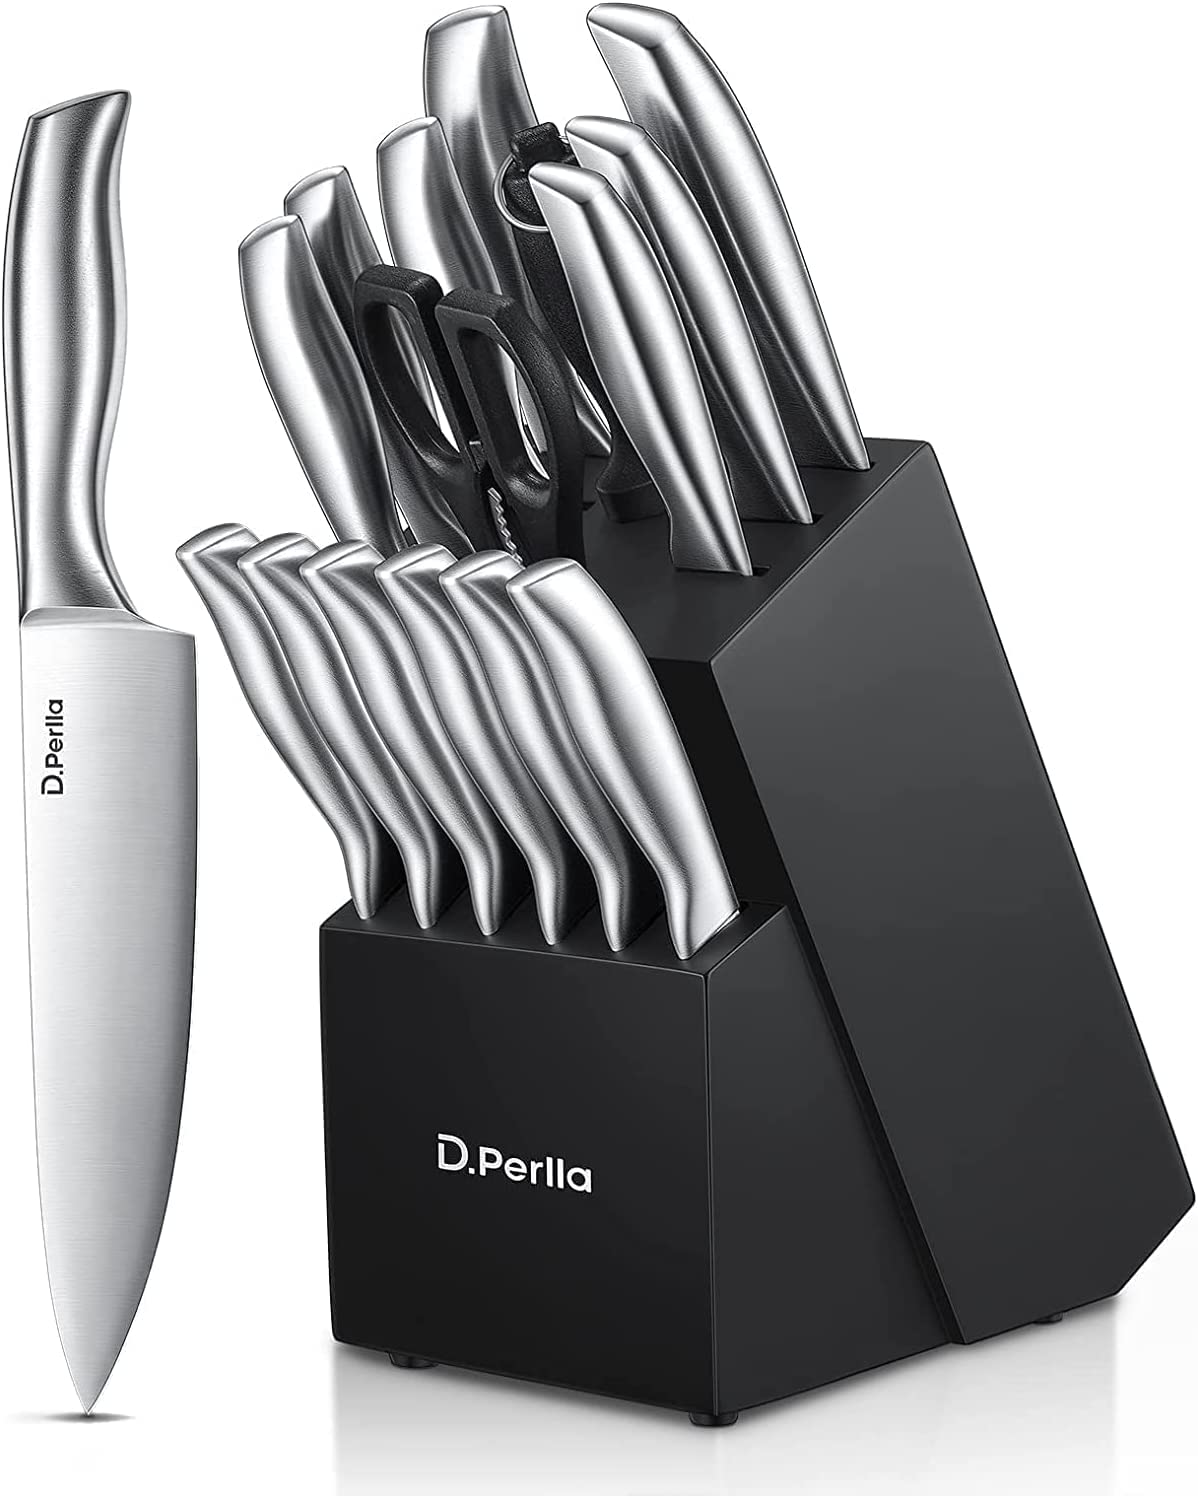 D.Perlla 16 Pieces Stainless Steel Knife Block Set with Hollow Handle, Black